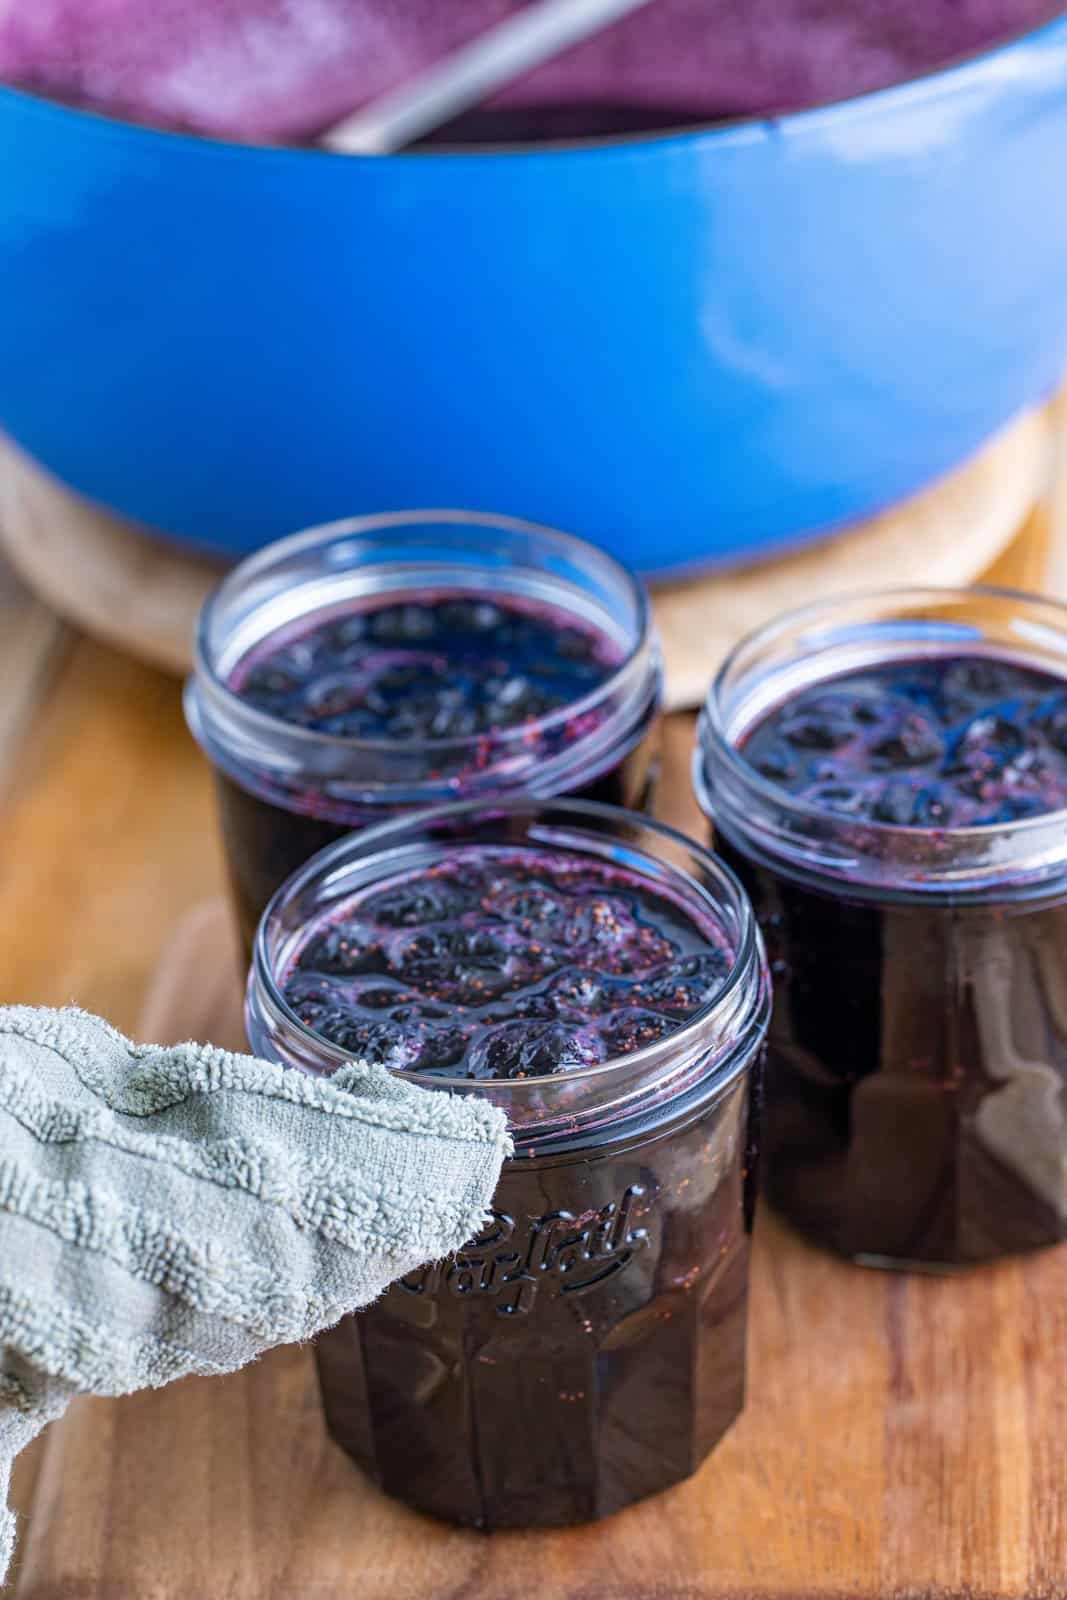 Wiping off the edge of a blueberry jam jar.